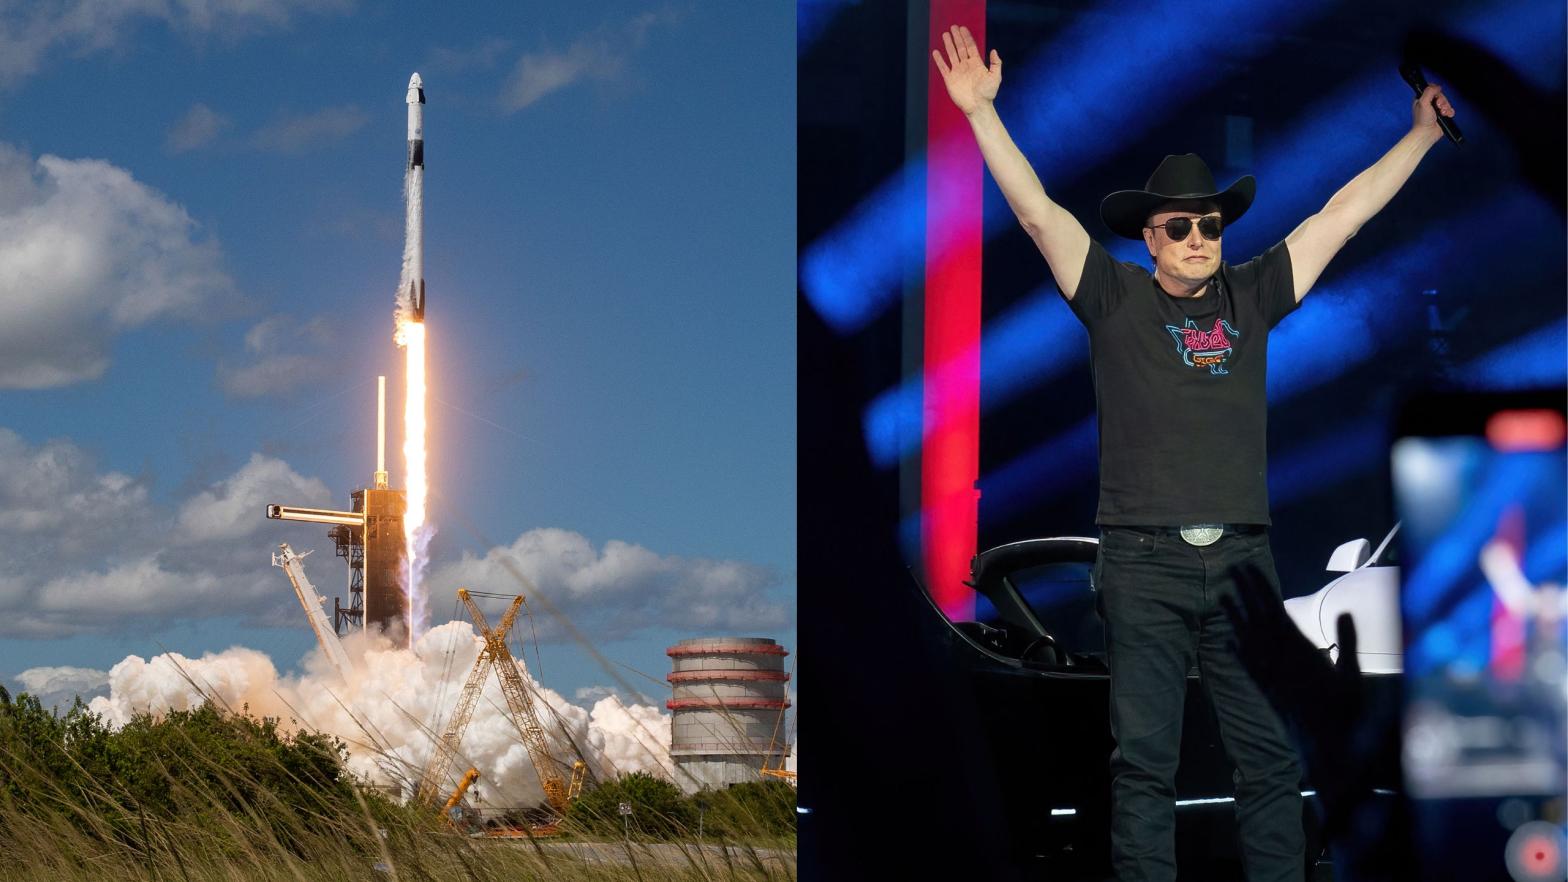 SpaceX's Falcon 9 rocket launching from Cape Canaveral, and Elon Musk looking his best.  (Image: Getty Images / Shutterstock / Gizmodo)